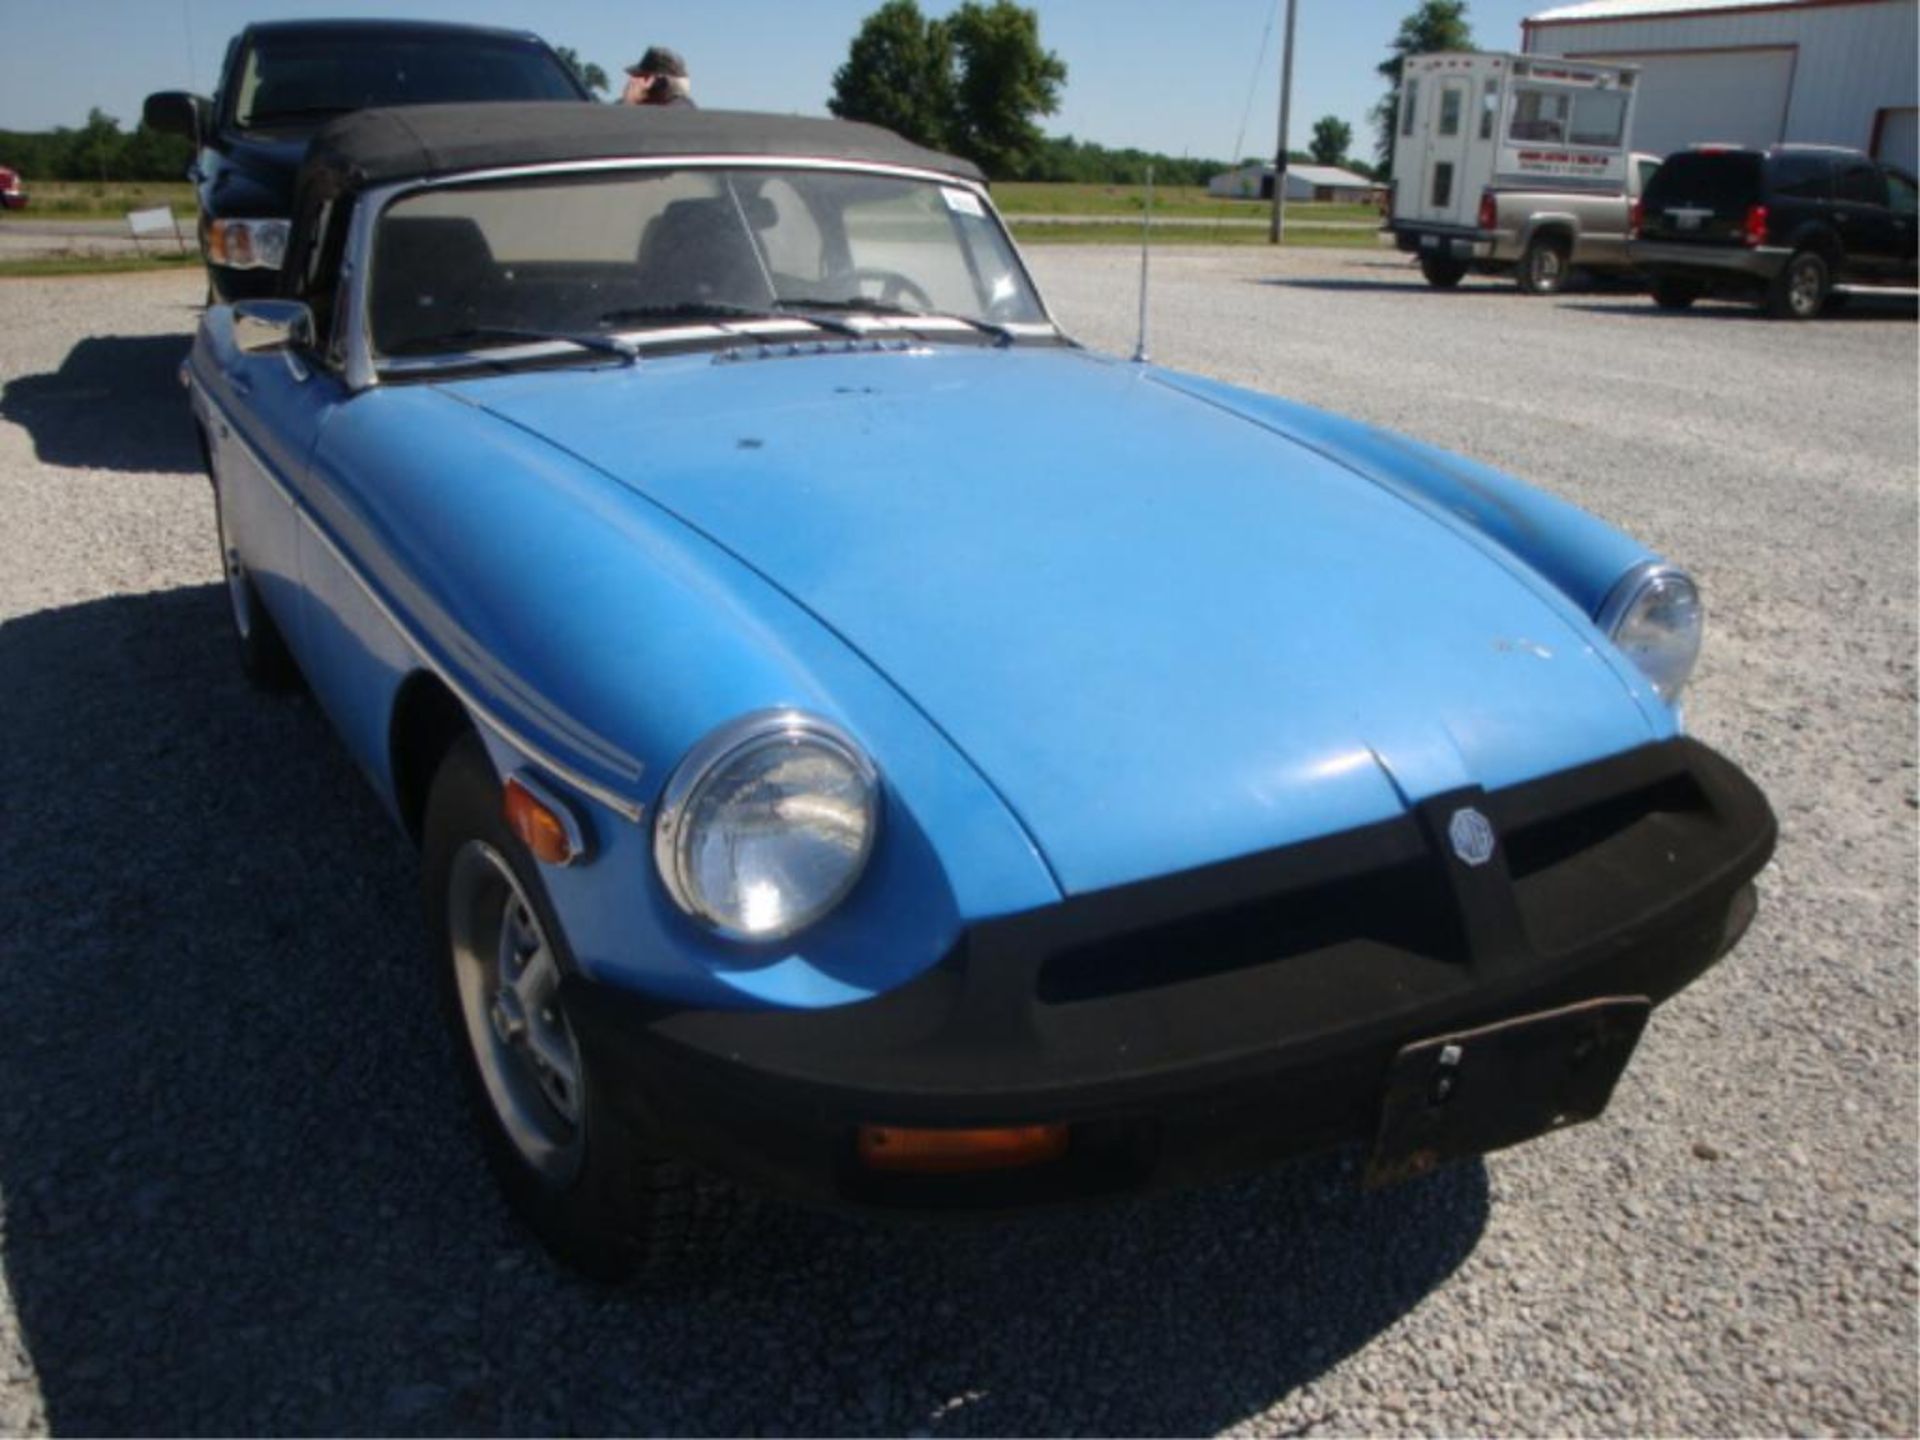 (Title) 1979 MGB, 14,890 miles on ODO,New in 2014: fuel pump, gas tank, clutch, radiator rodded - Image 8 of 34